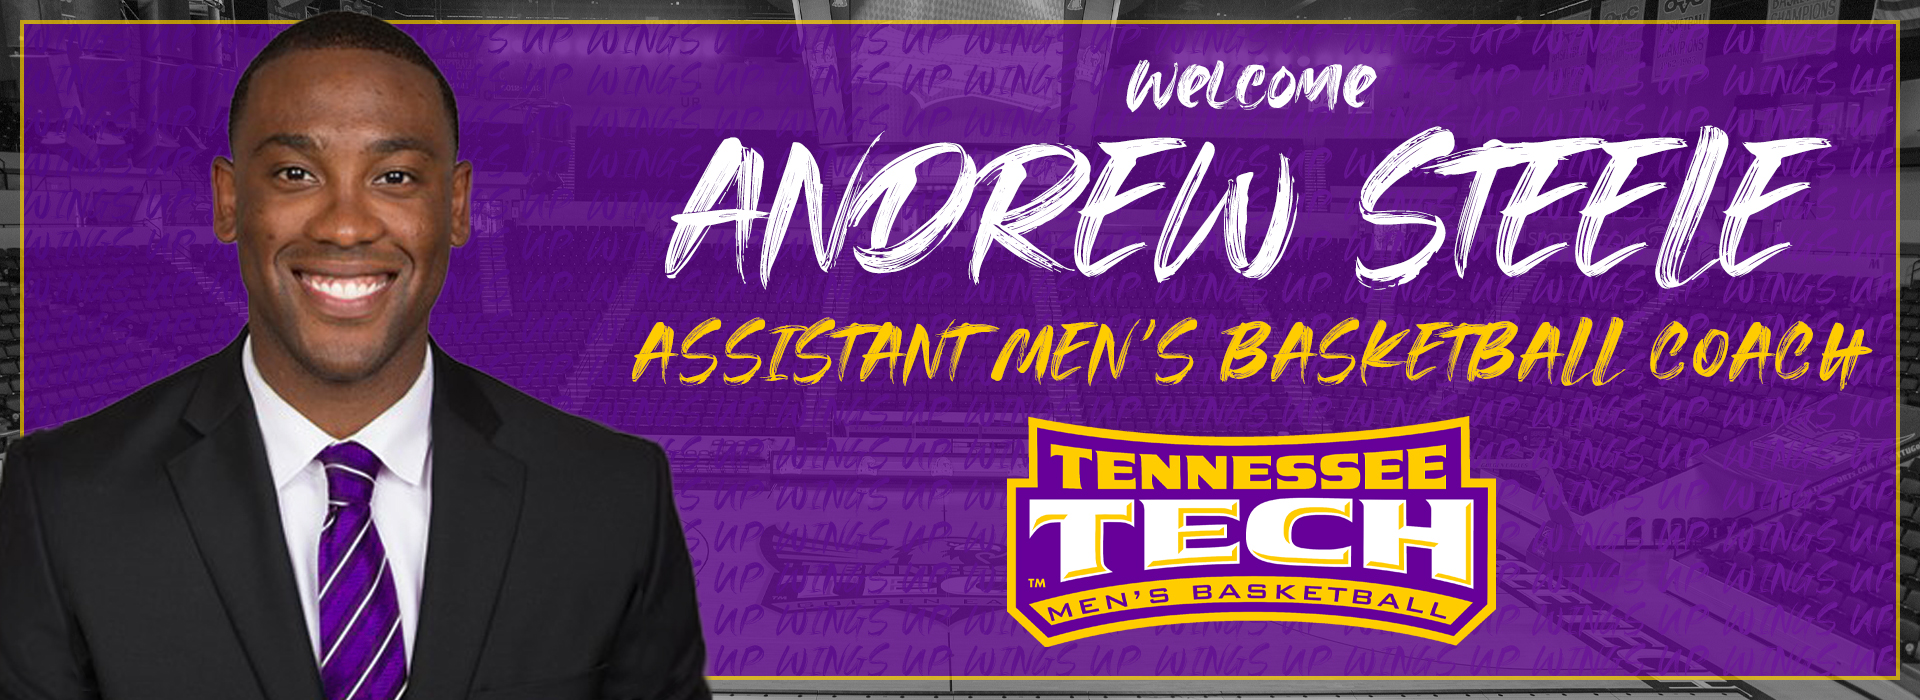 Steele added to Tech men's basketball staff as assistant coach